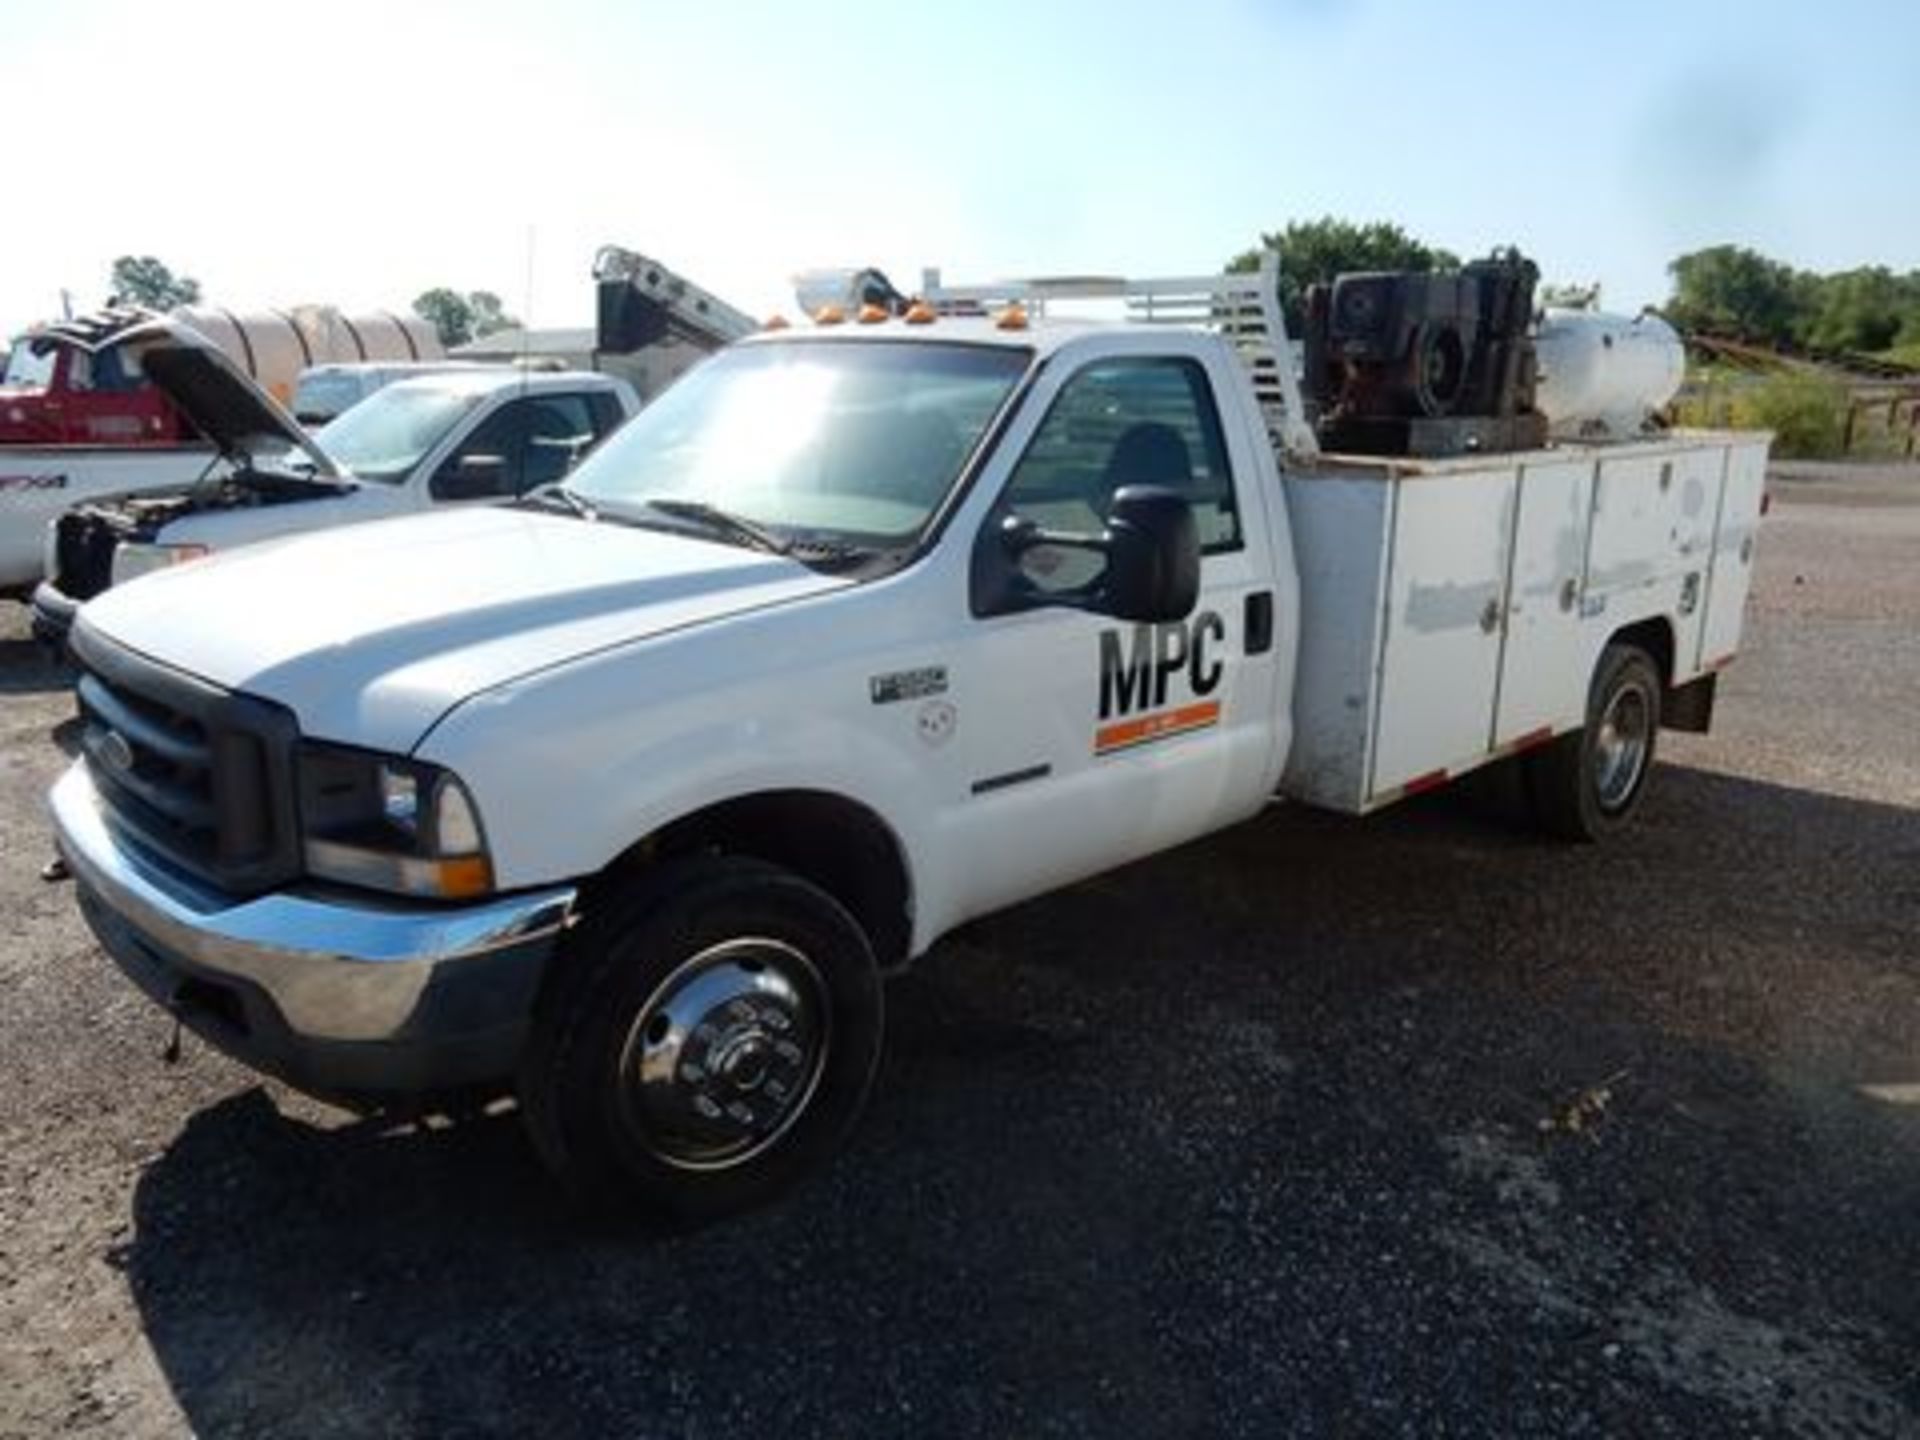 2002 FORD, M# F550XL SERVICE TRUCK, VIN# N/A - Image 2 of 4